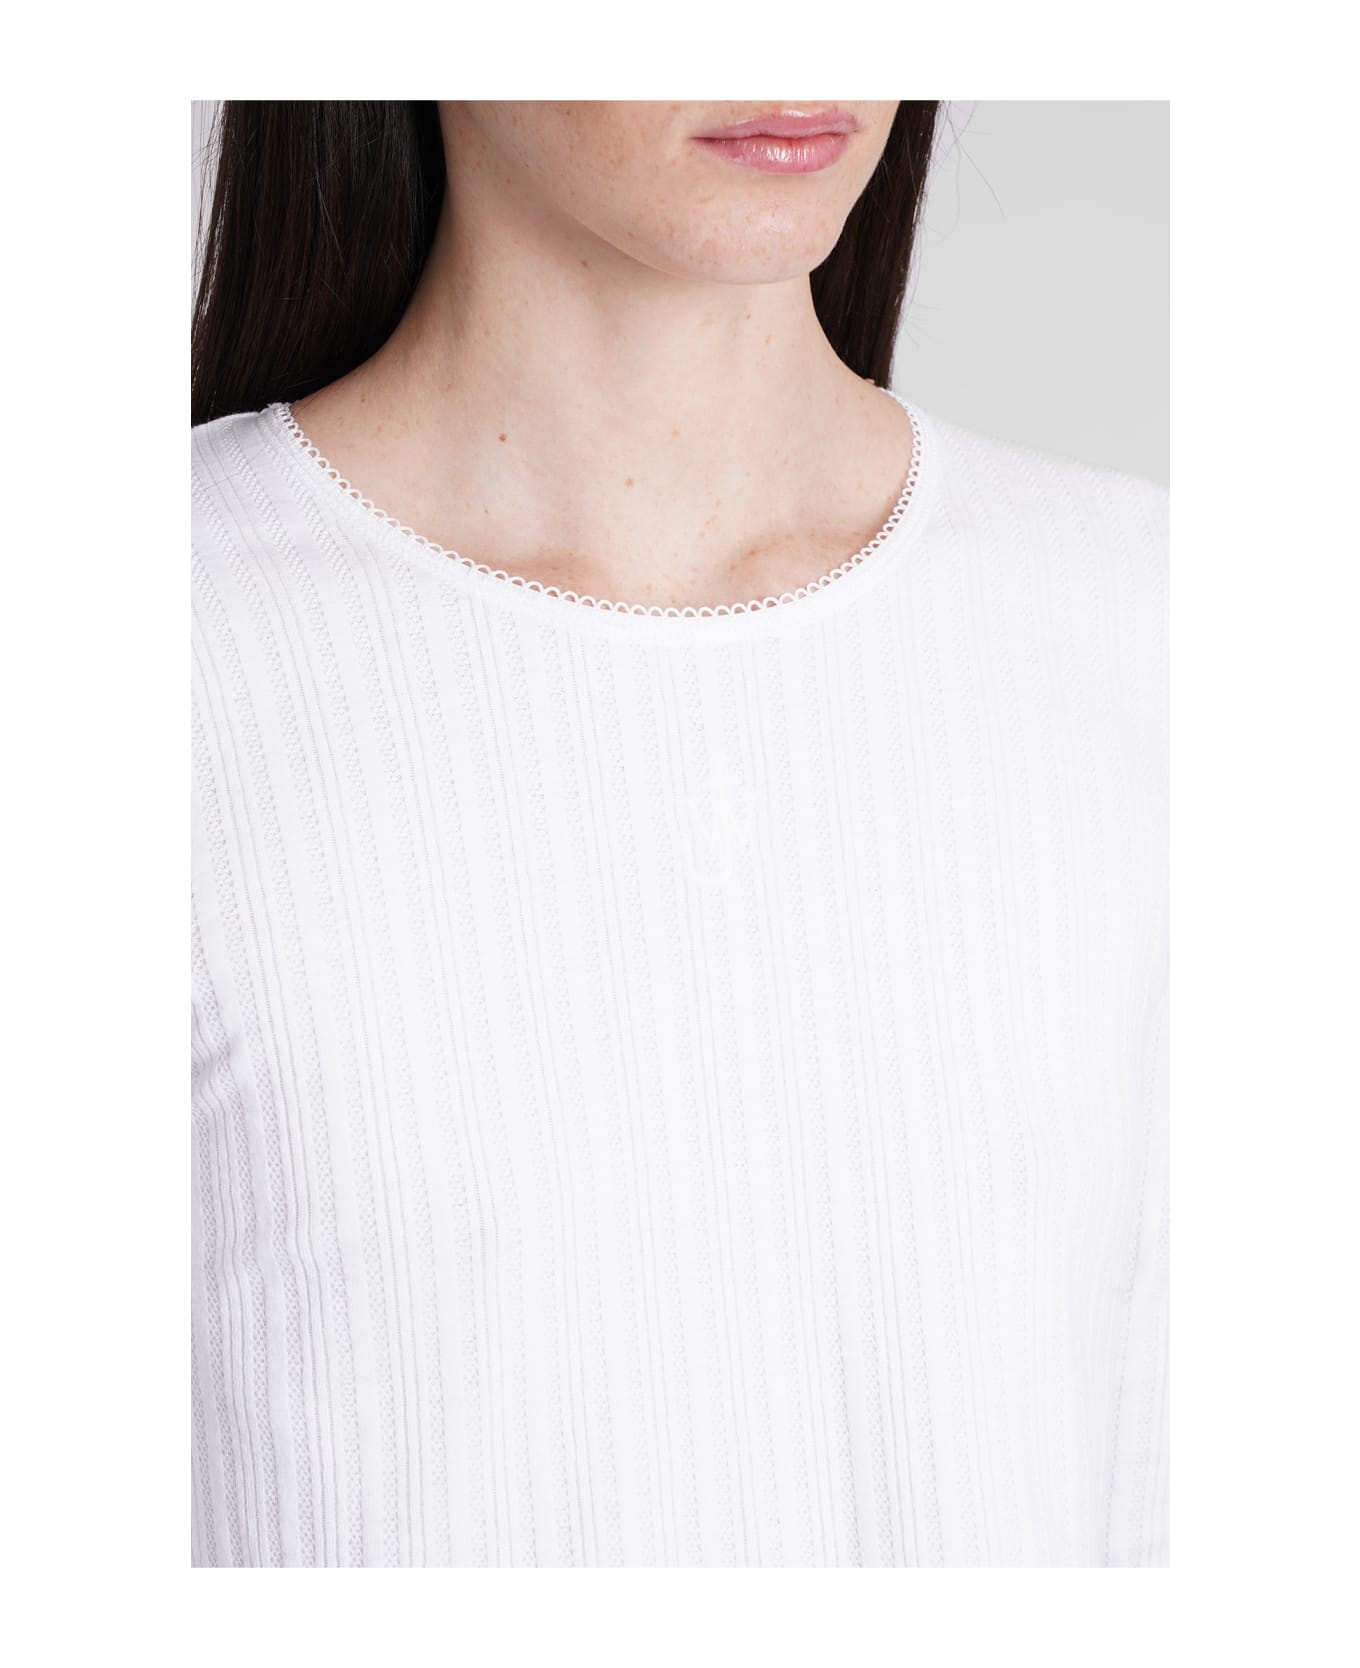 J.W. Anderson T-shirt In White Cotton - white